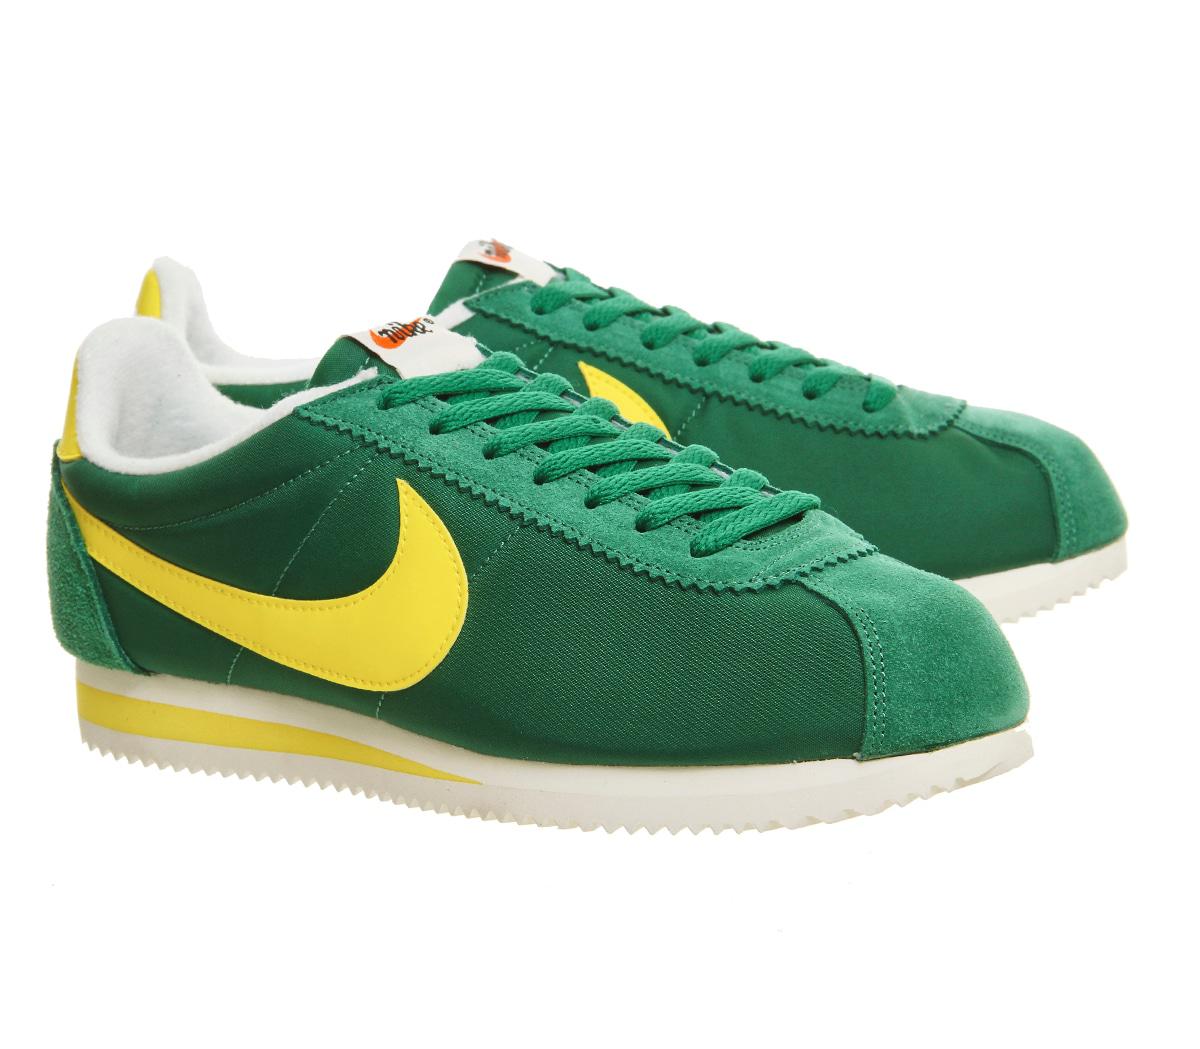  Nike  Cortez  Nylon Trainers in Green  for Men Lyst